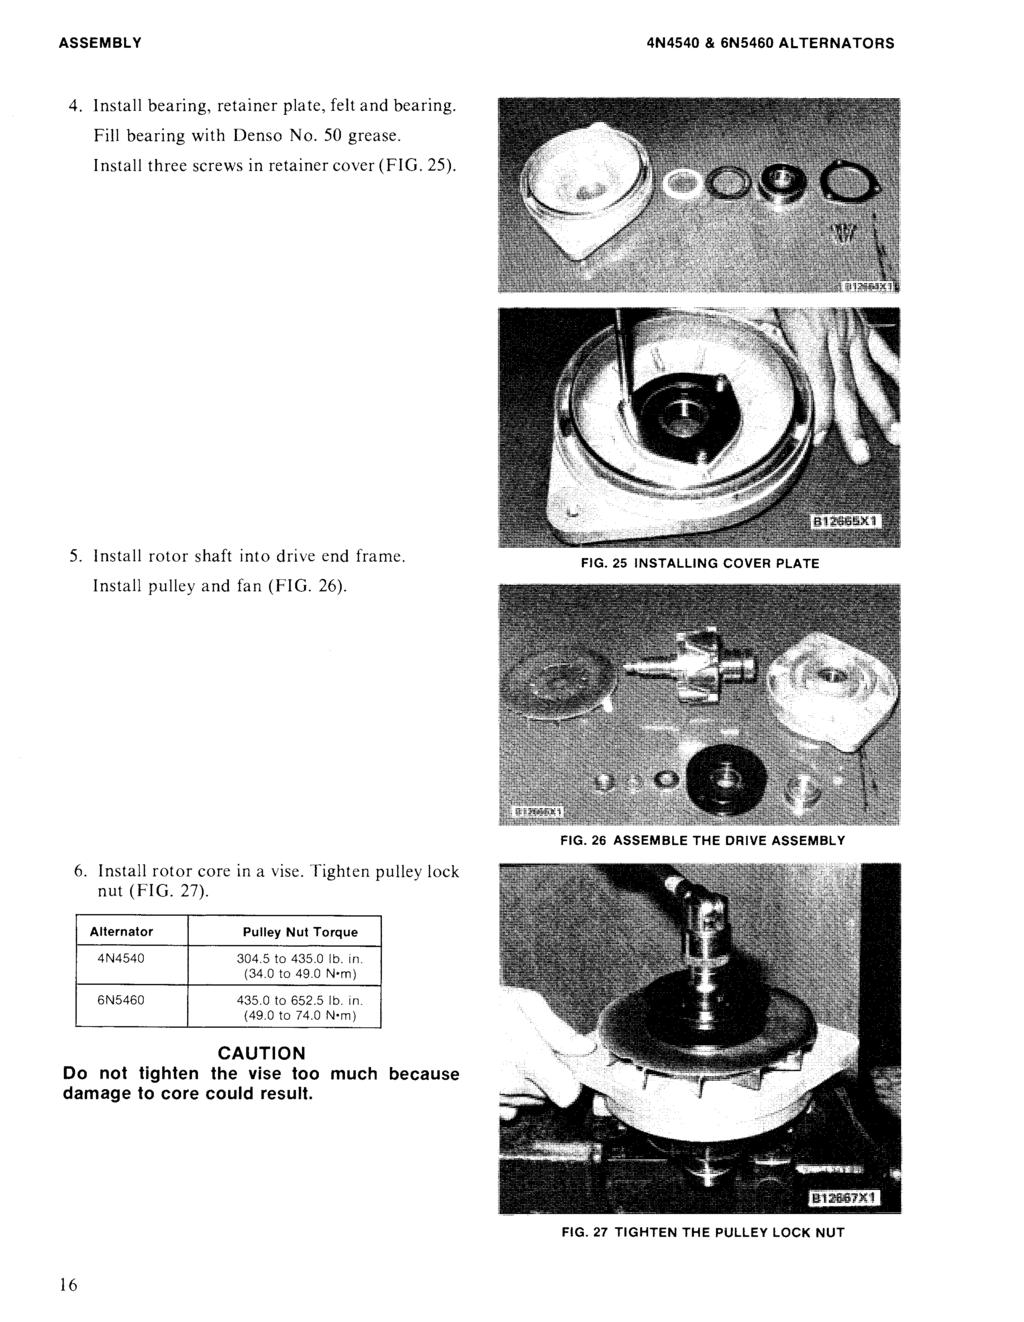 ASSEMBLY 4N4540 & 6N5460 ALTERNATORS 4. Install bearing, retainer plate, felt and bearing. Fill bearing with Denso No. 50 grease. Install three screws in retainer cover (FIG. 25). 5. Install rotor shaft into drive end frame.